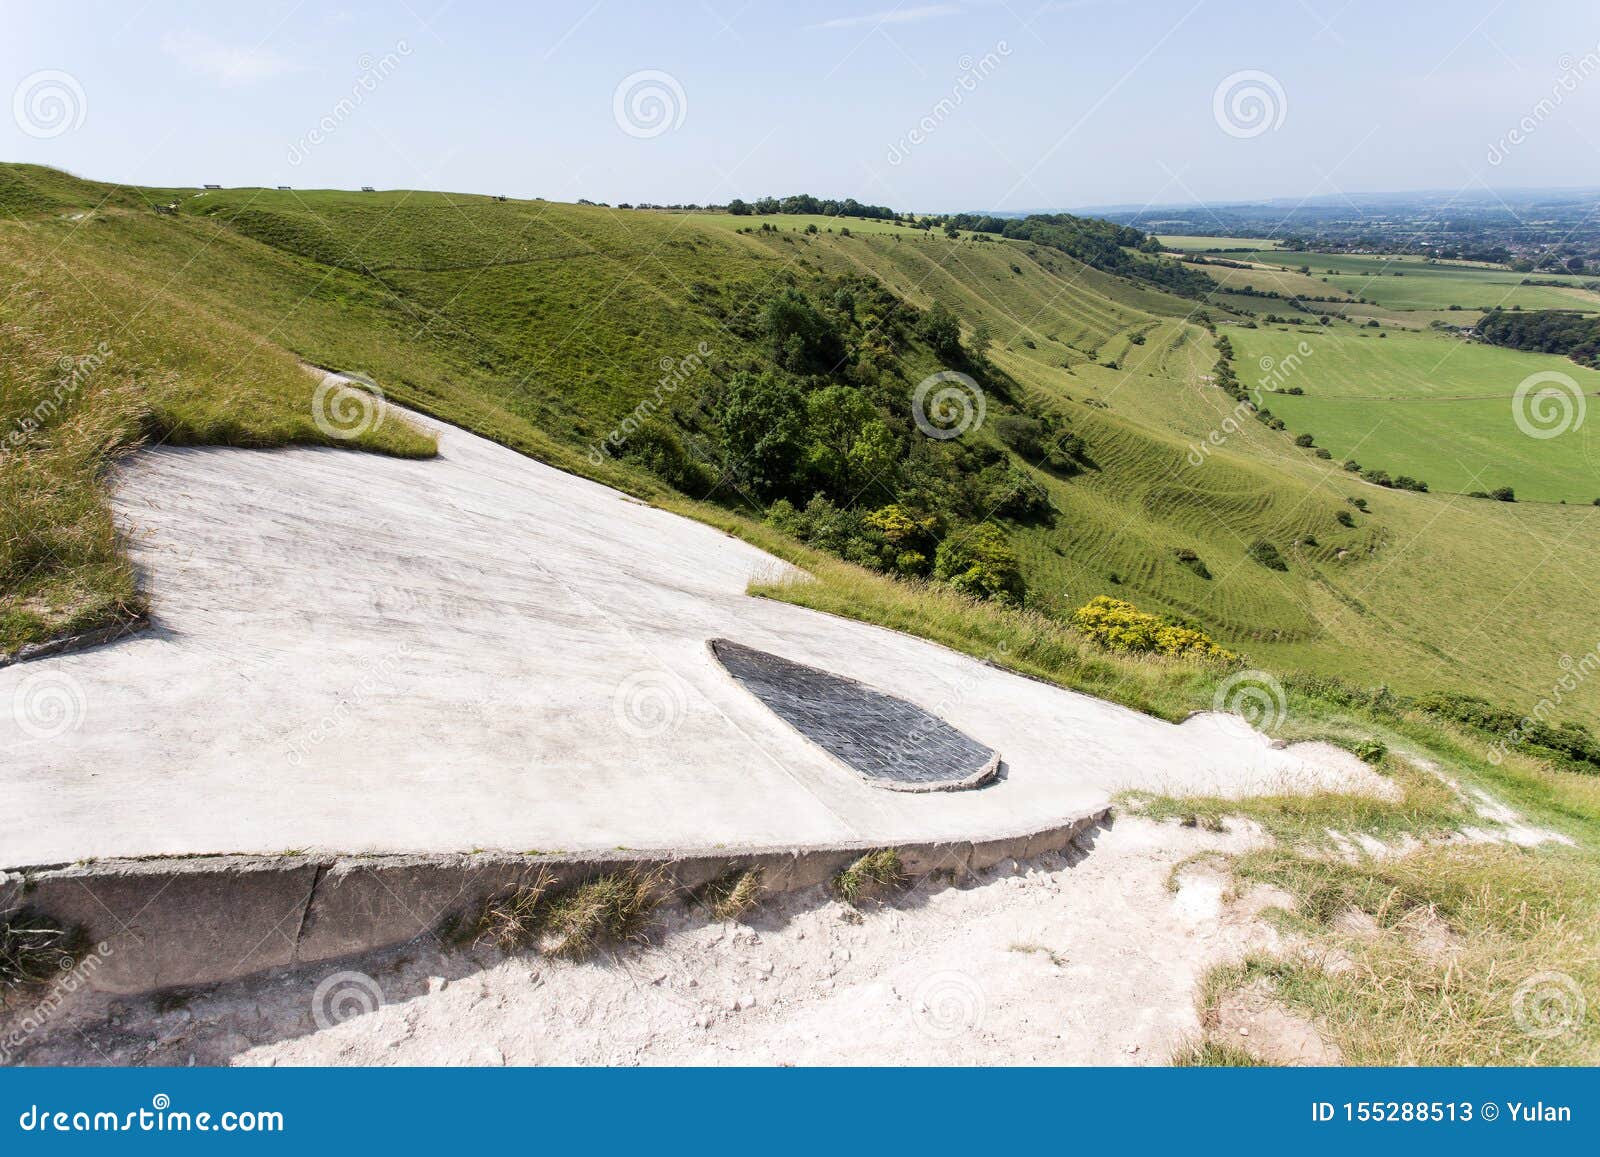 eye of the white horse on hill in wiltshire, england,